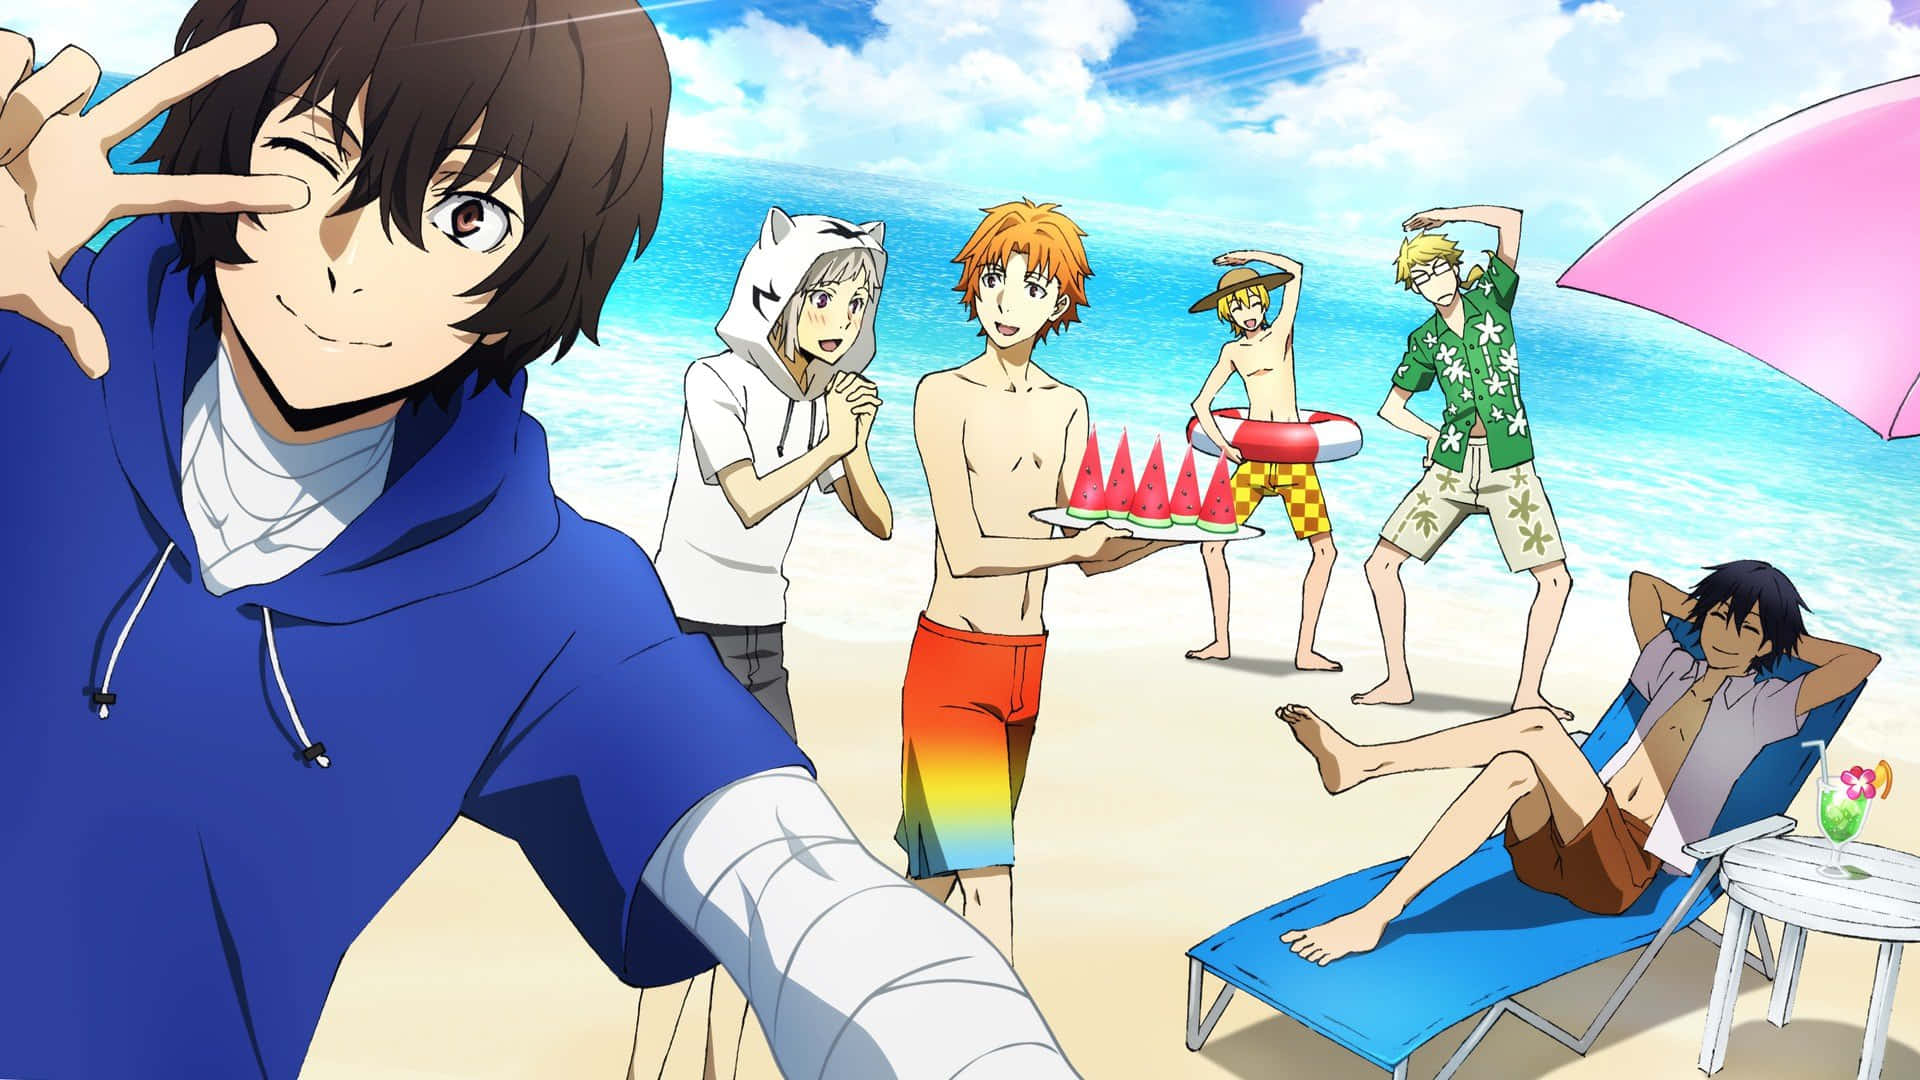 Take the plunge and enjoy a beach day with your favorite Anime characters Wallpaper